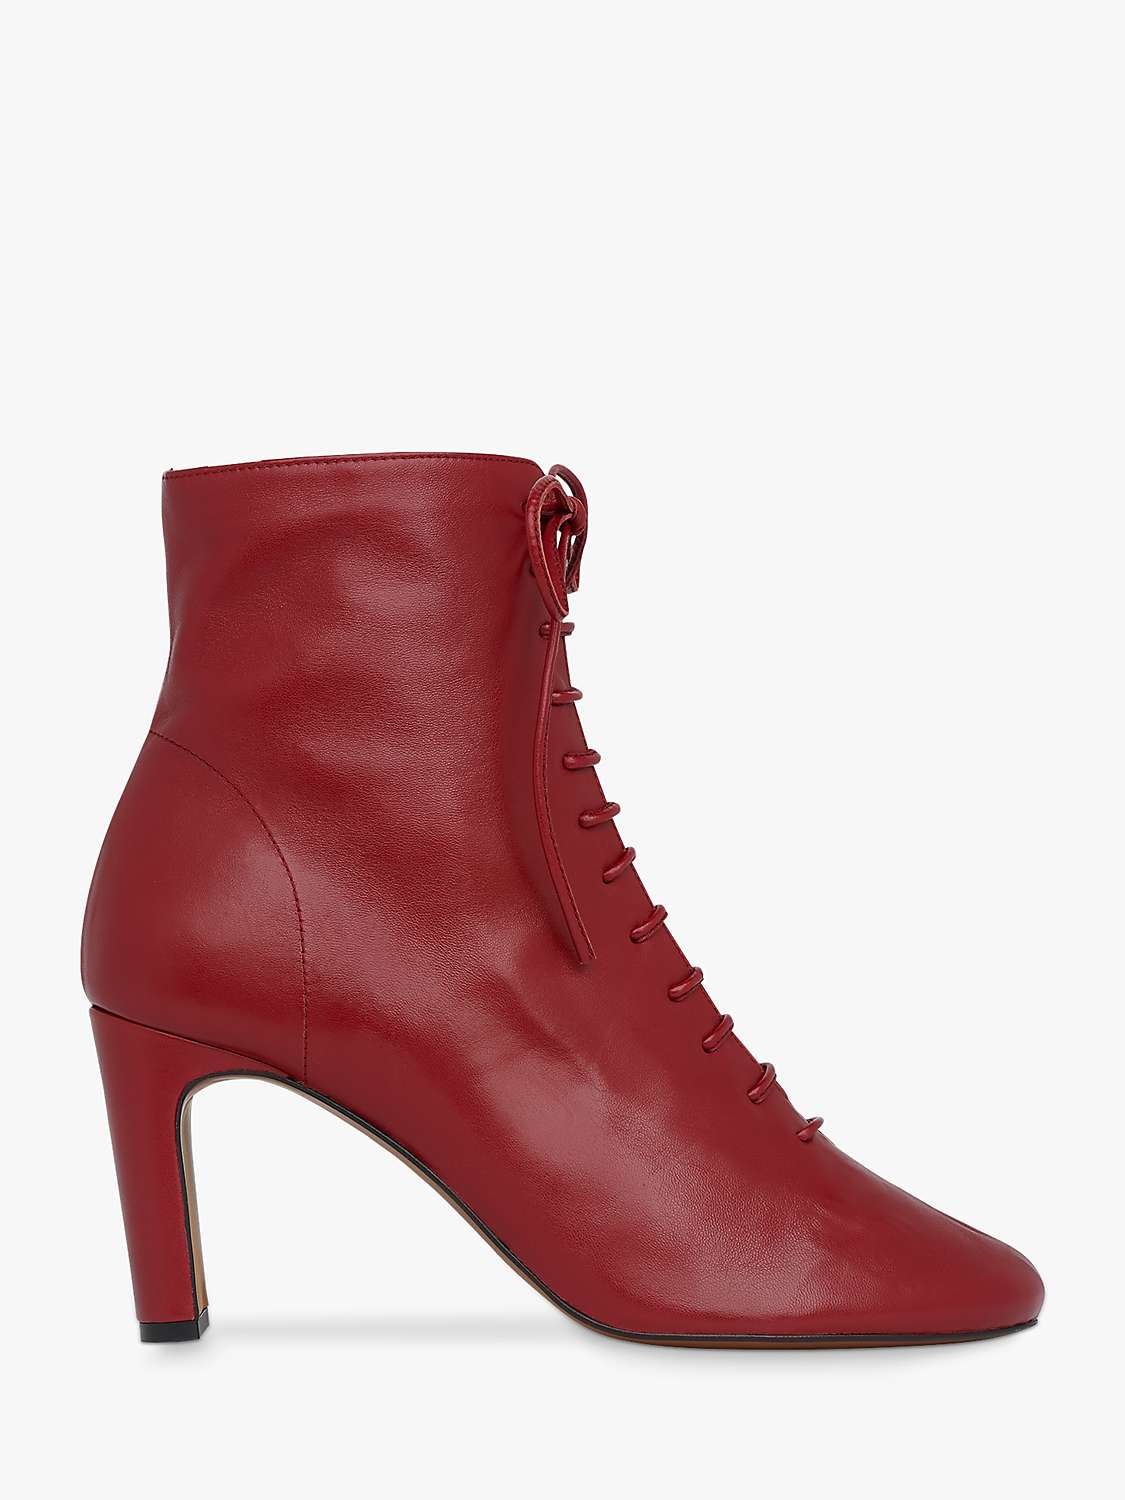 Whistles Dahlia Leather Lace Up Ankle Boots, Red at John Lewis & Partners